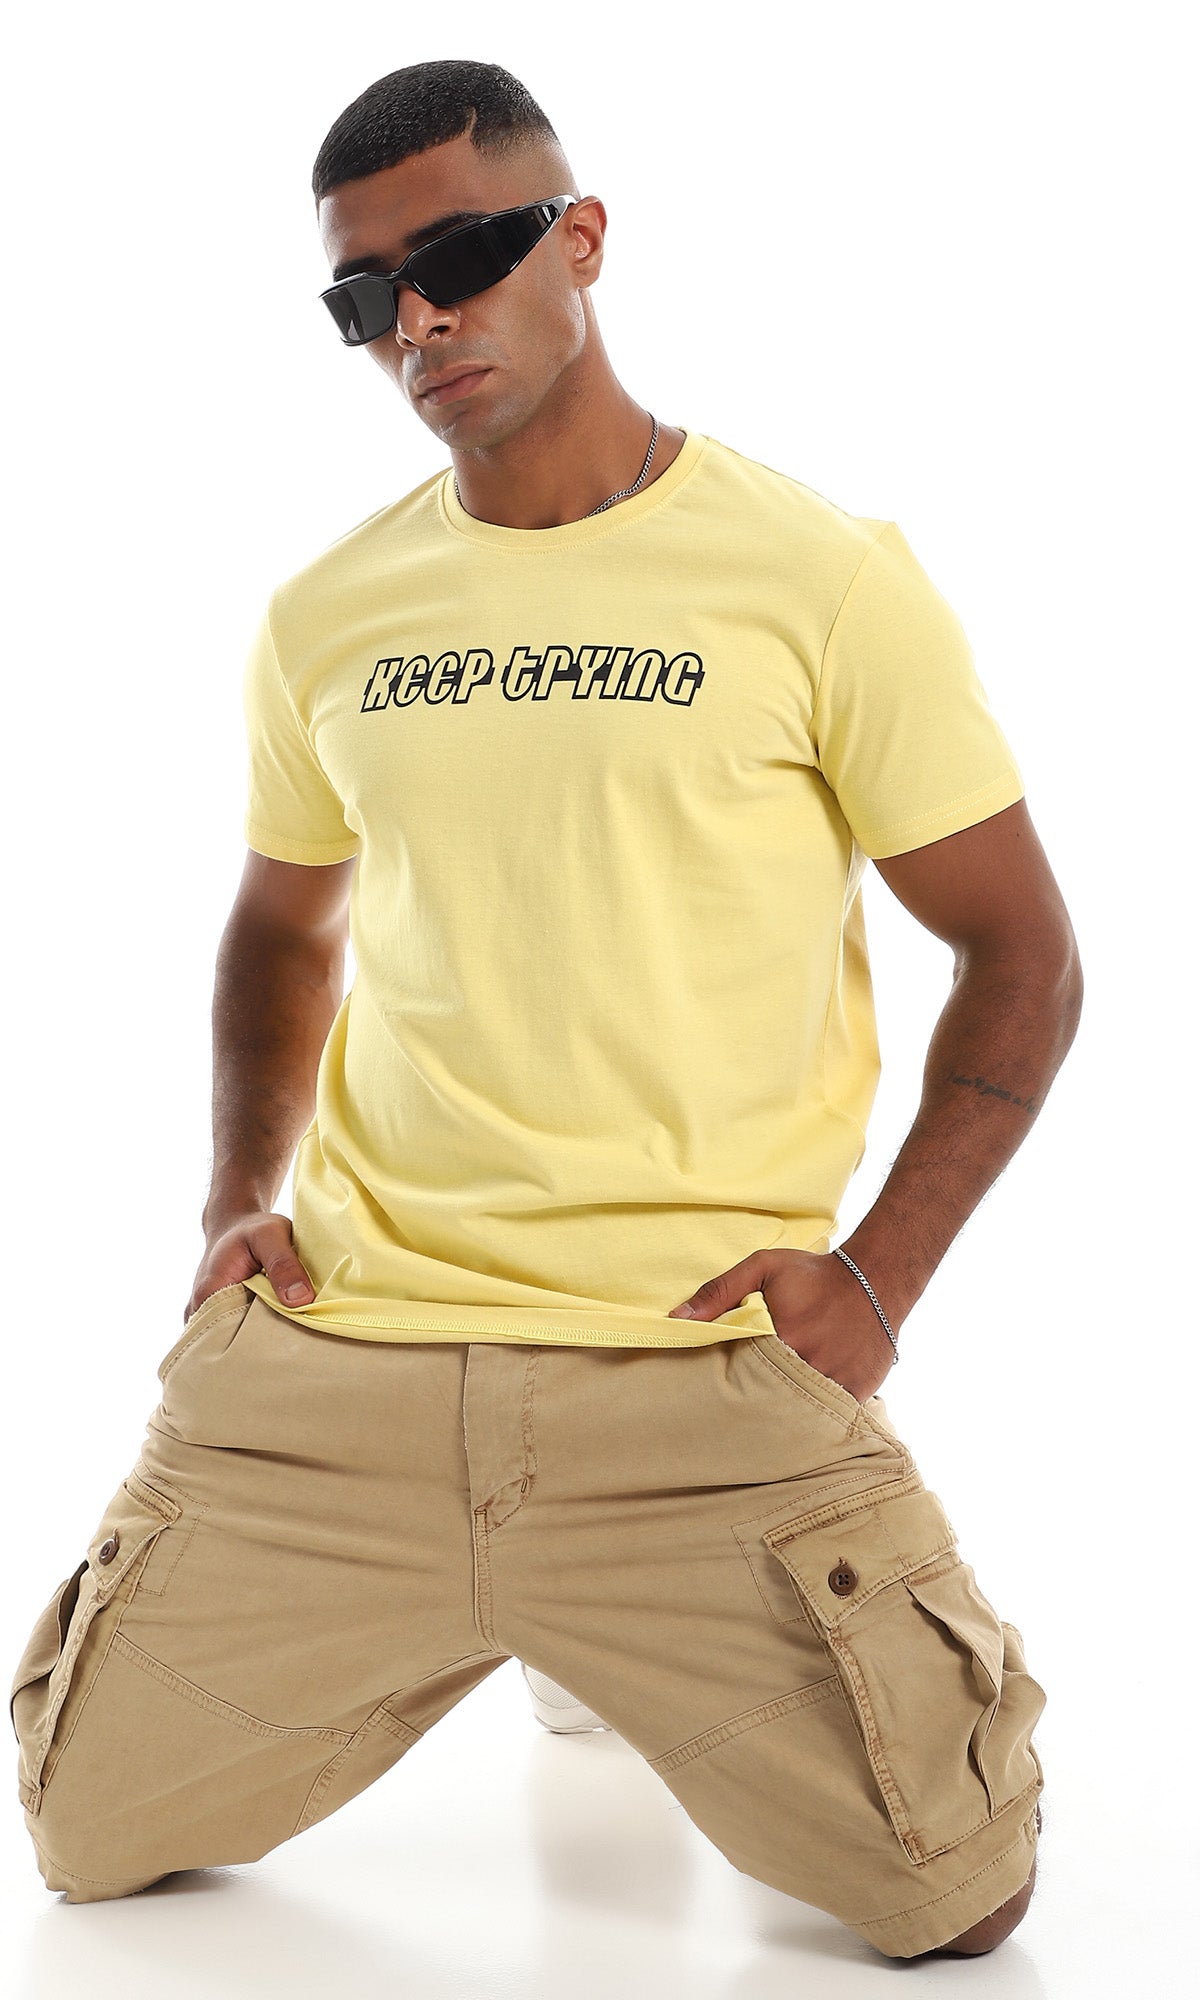 97737 "Keep Trying" Printed Cotton T-Shirt - Yellow